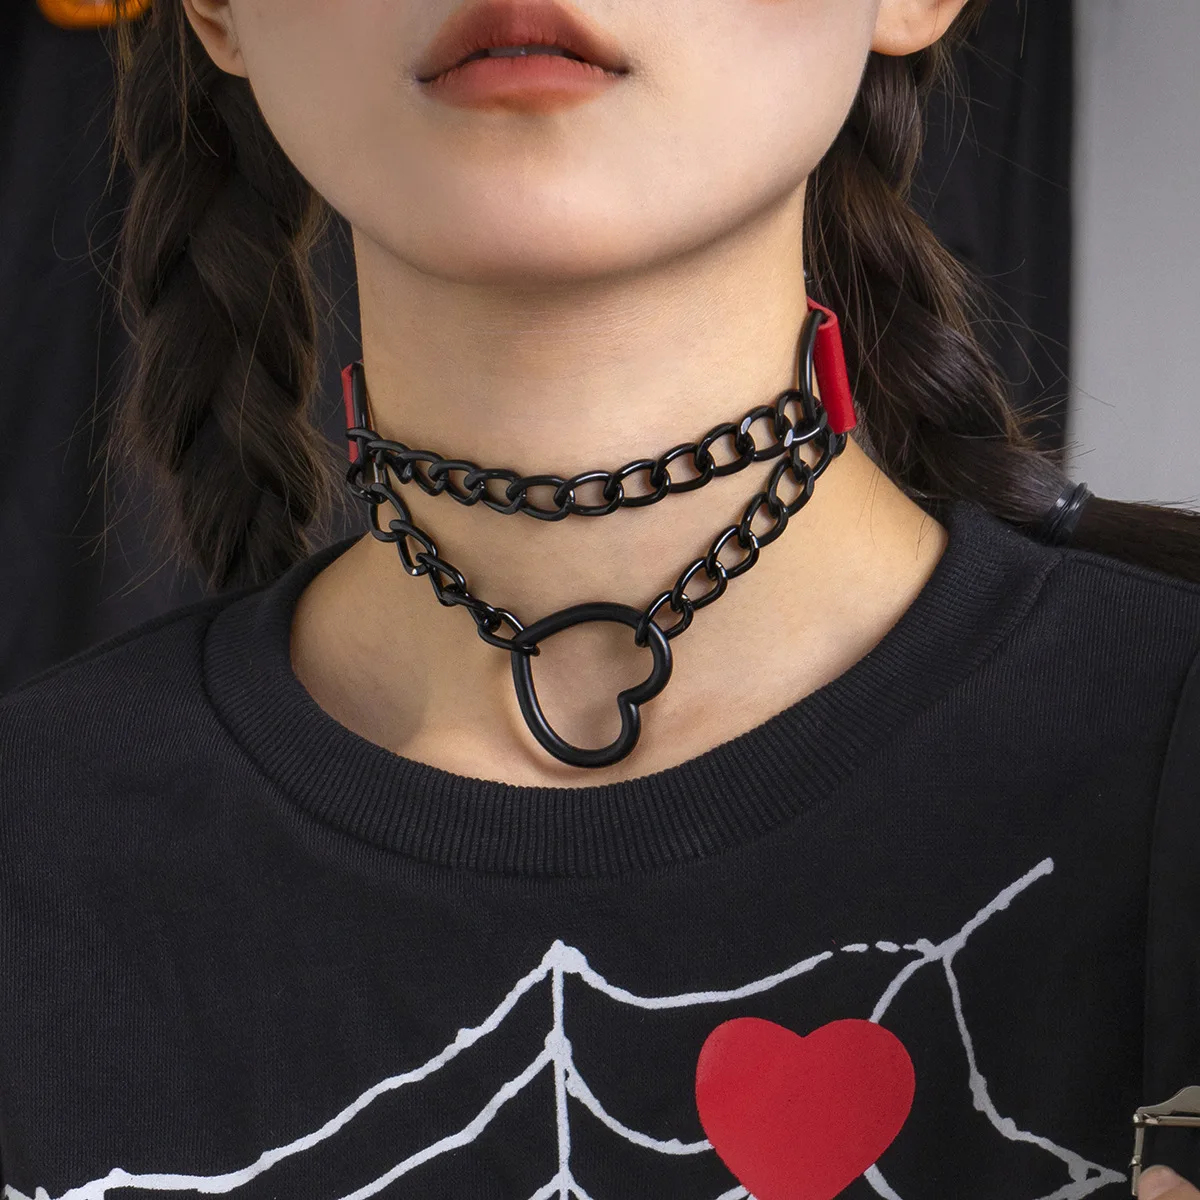 

New Gothic Punk Love Chain Necklace for Women Fashion Retro Halloween Clavicular Metal PU Chain Choker Jewelry Gift Collier